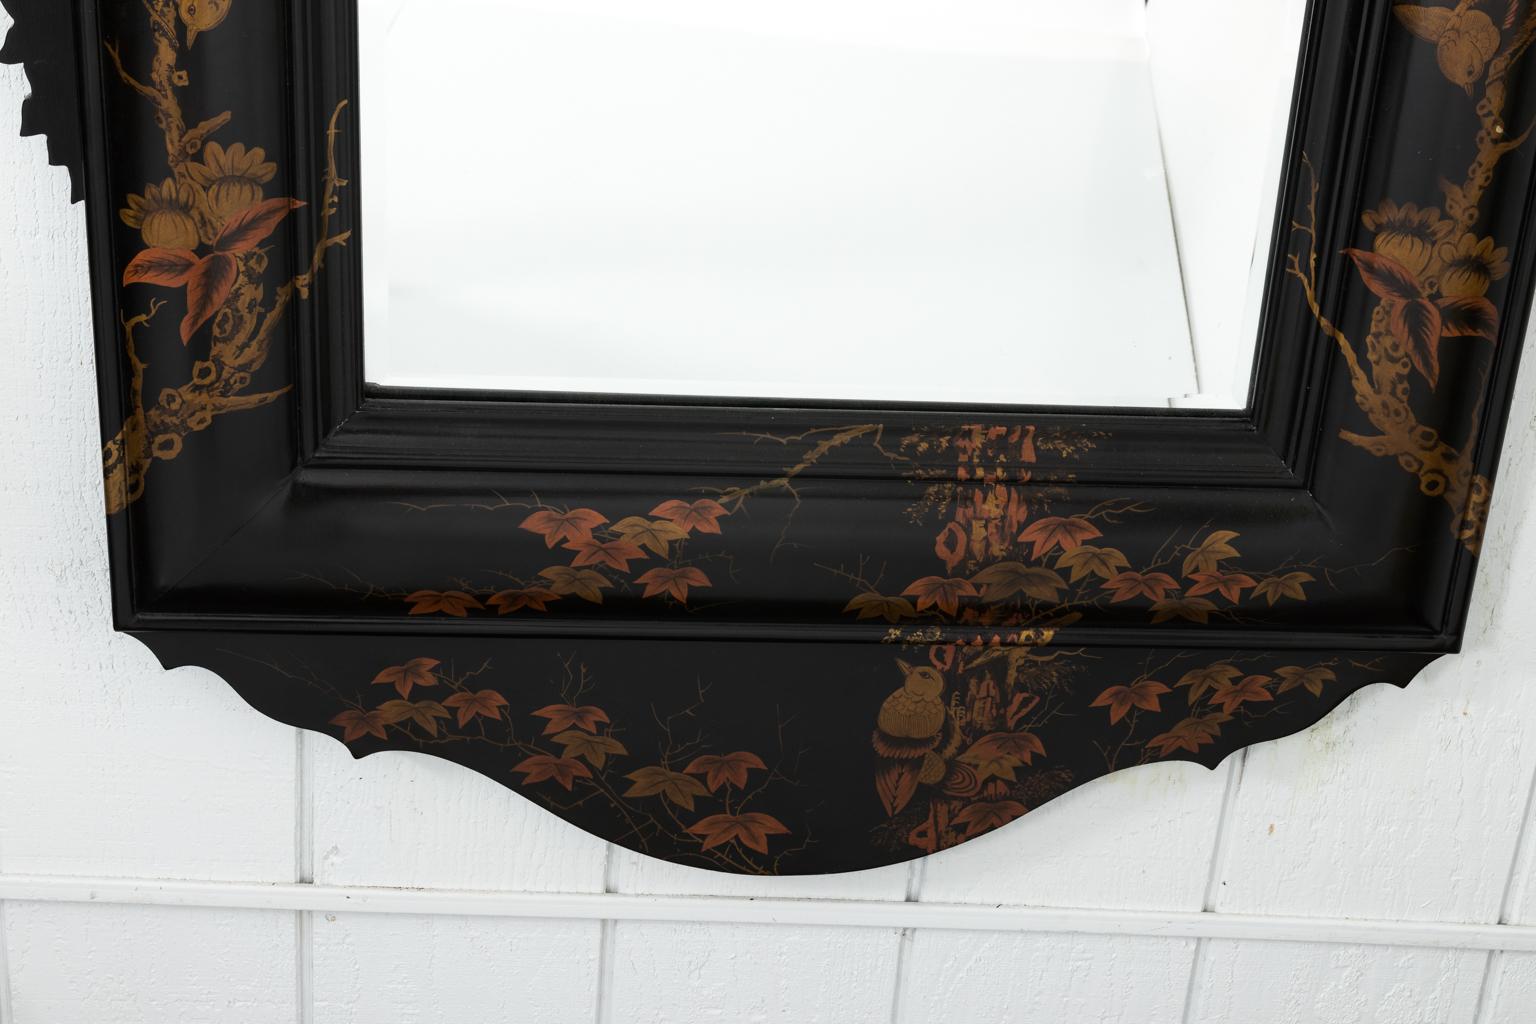 Japanned mirror with foliage and birds painted on an ebonized wooden frame with scalloped pediment, circa 20th century.